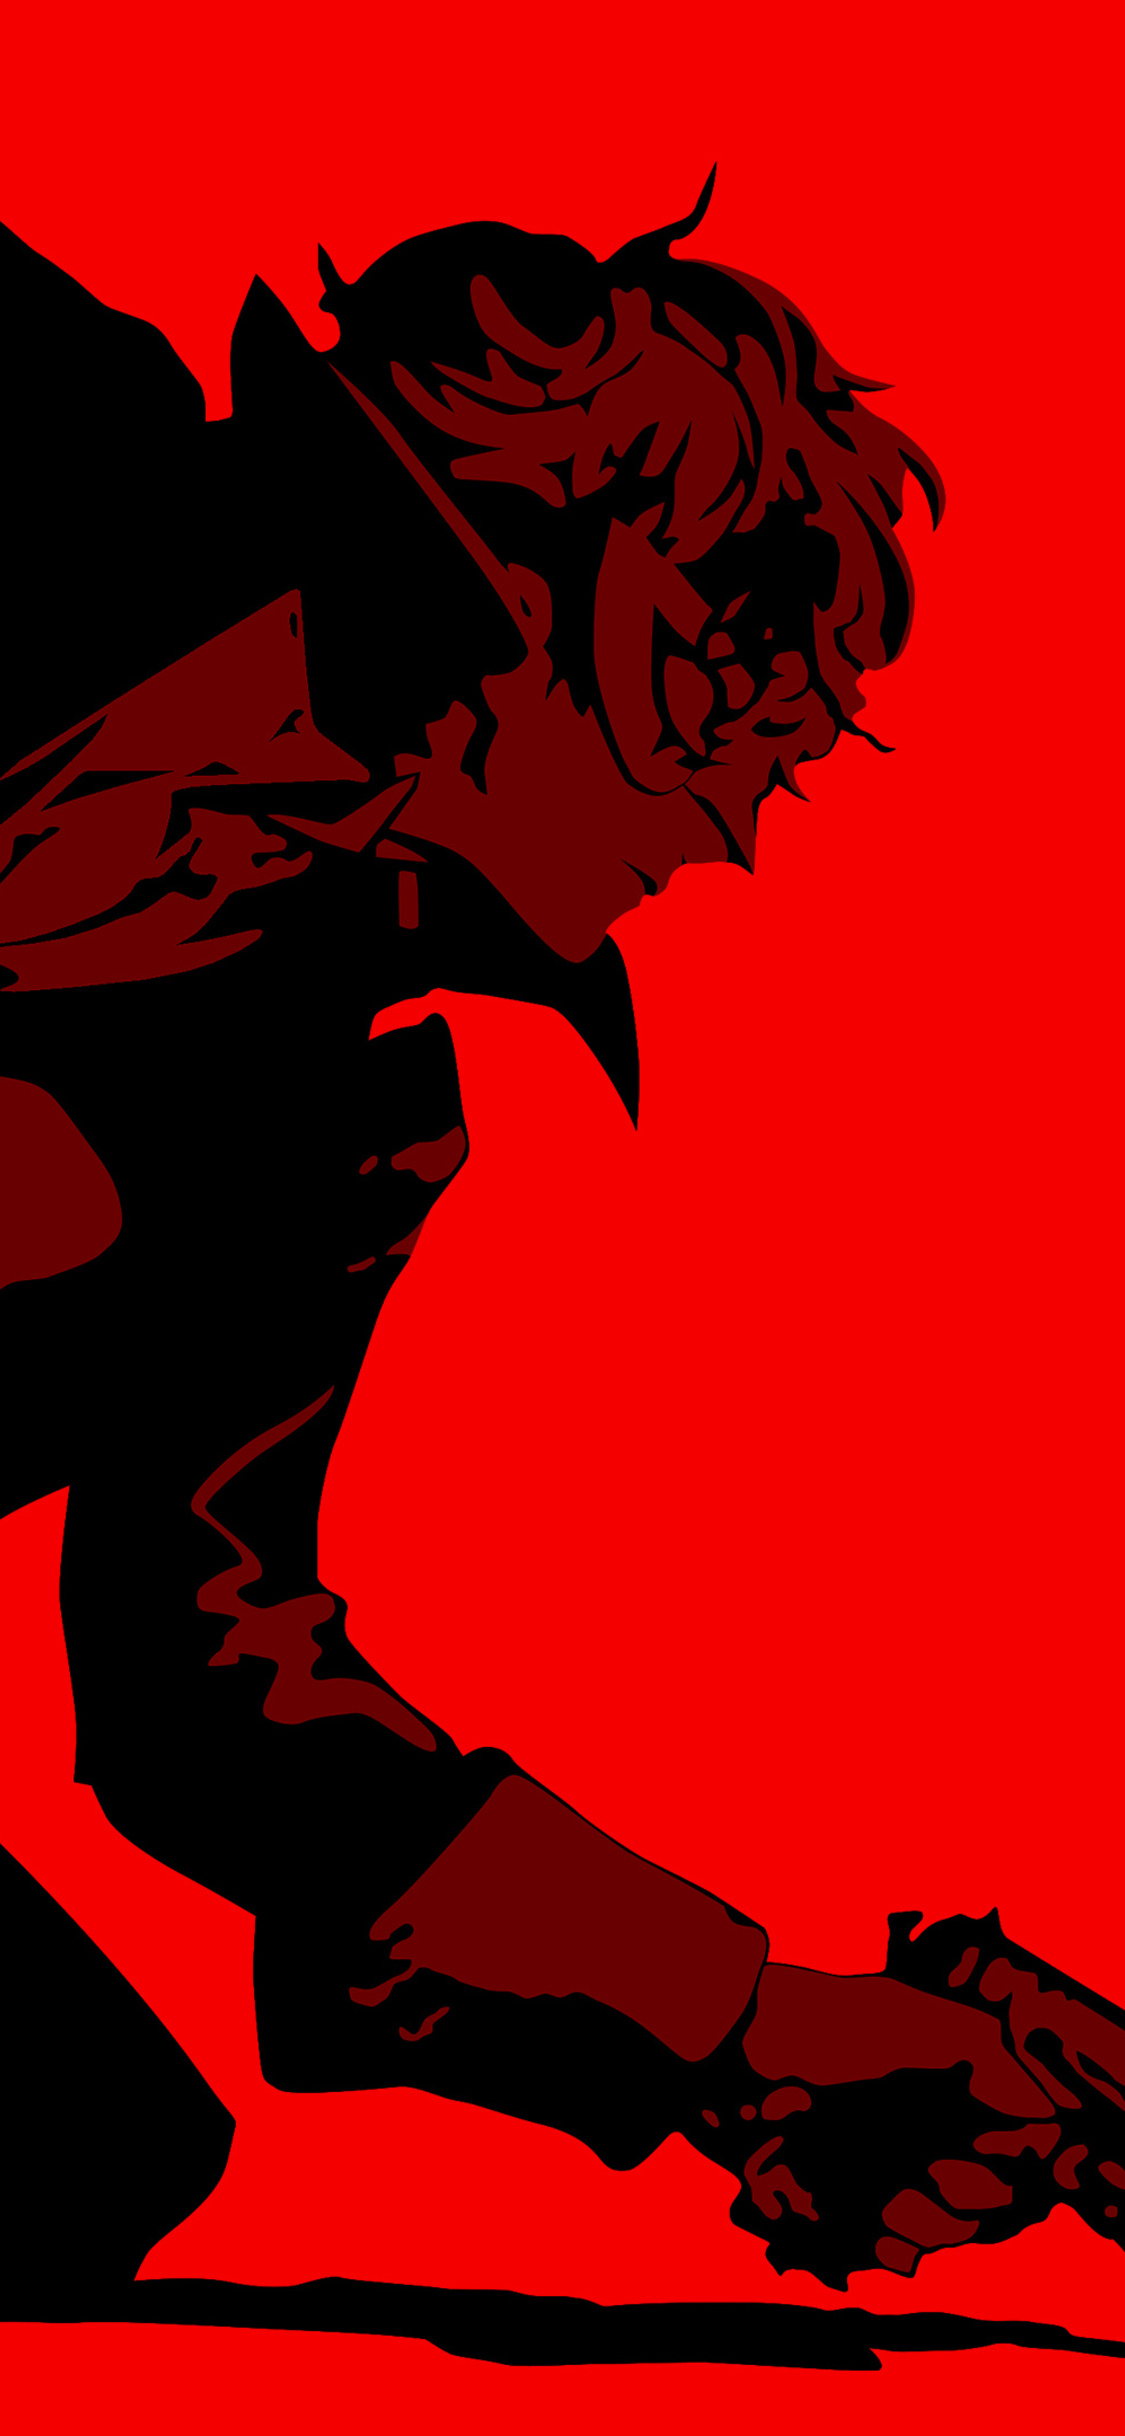 Download Unlock the power of Persona 5 with the new Iphone Wallpaper   Wallpaperscom